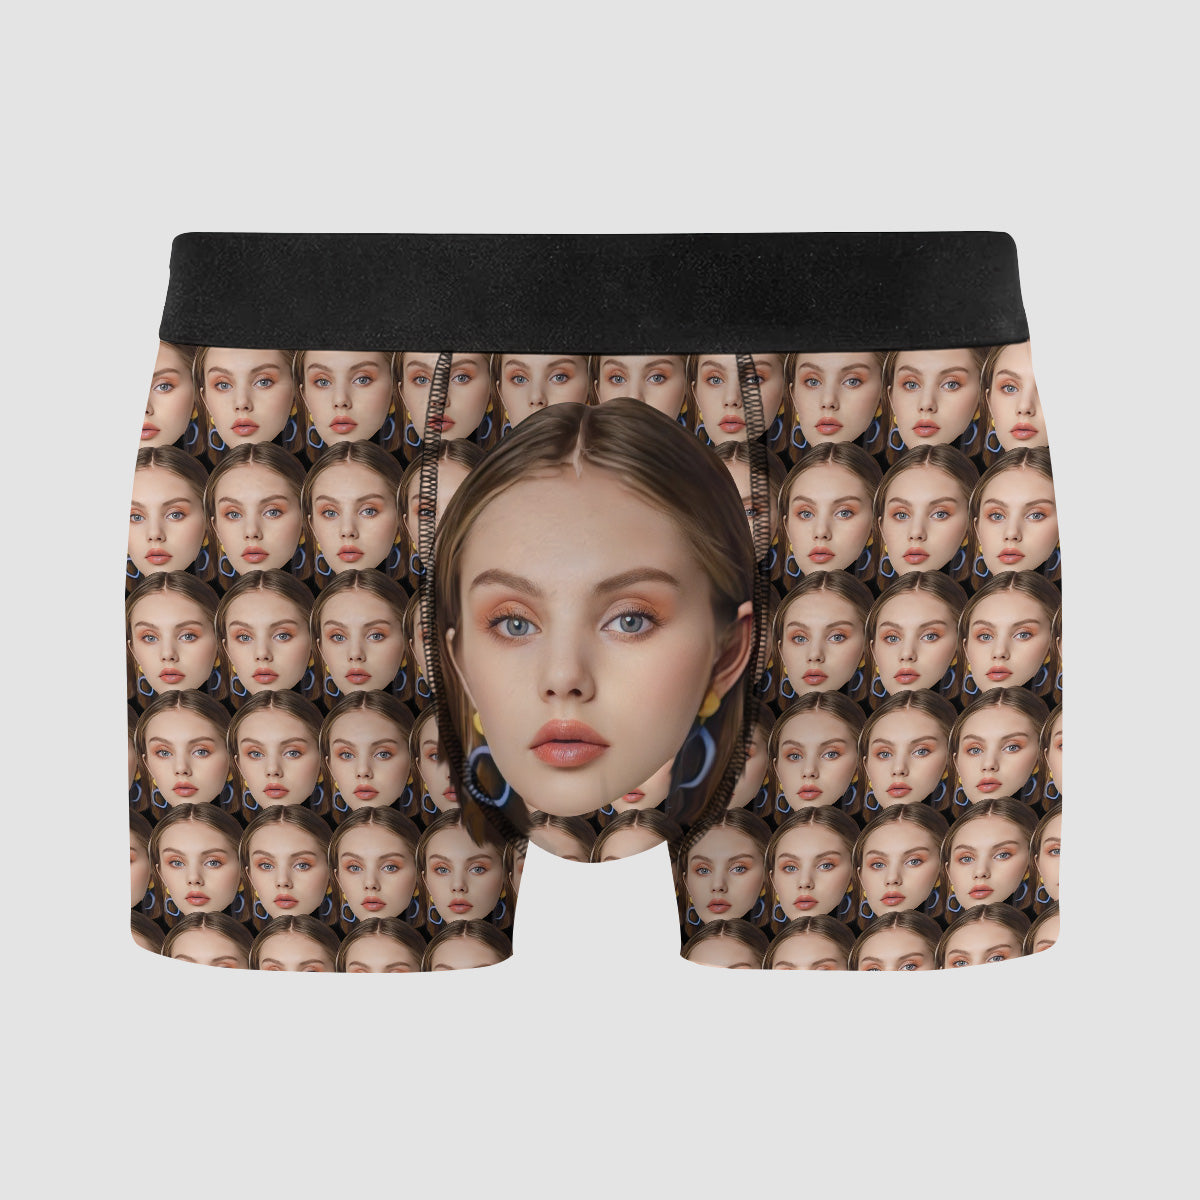 Custom Boxers for Boyfriend or Husband Personalized Face Underwear